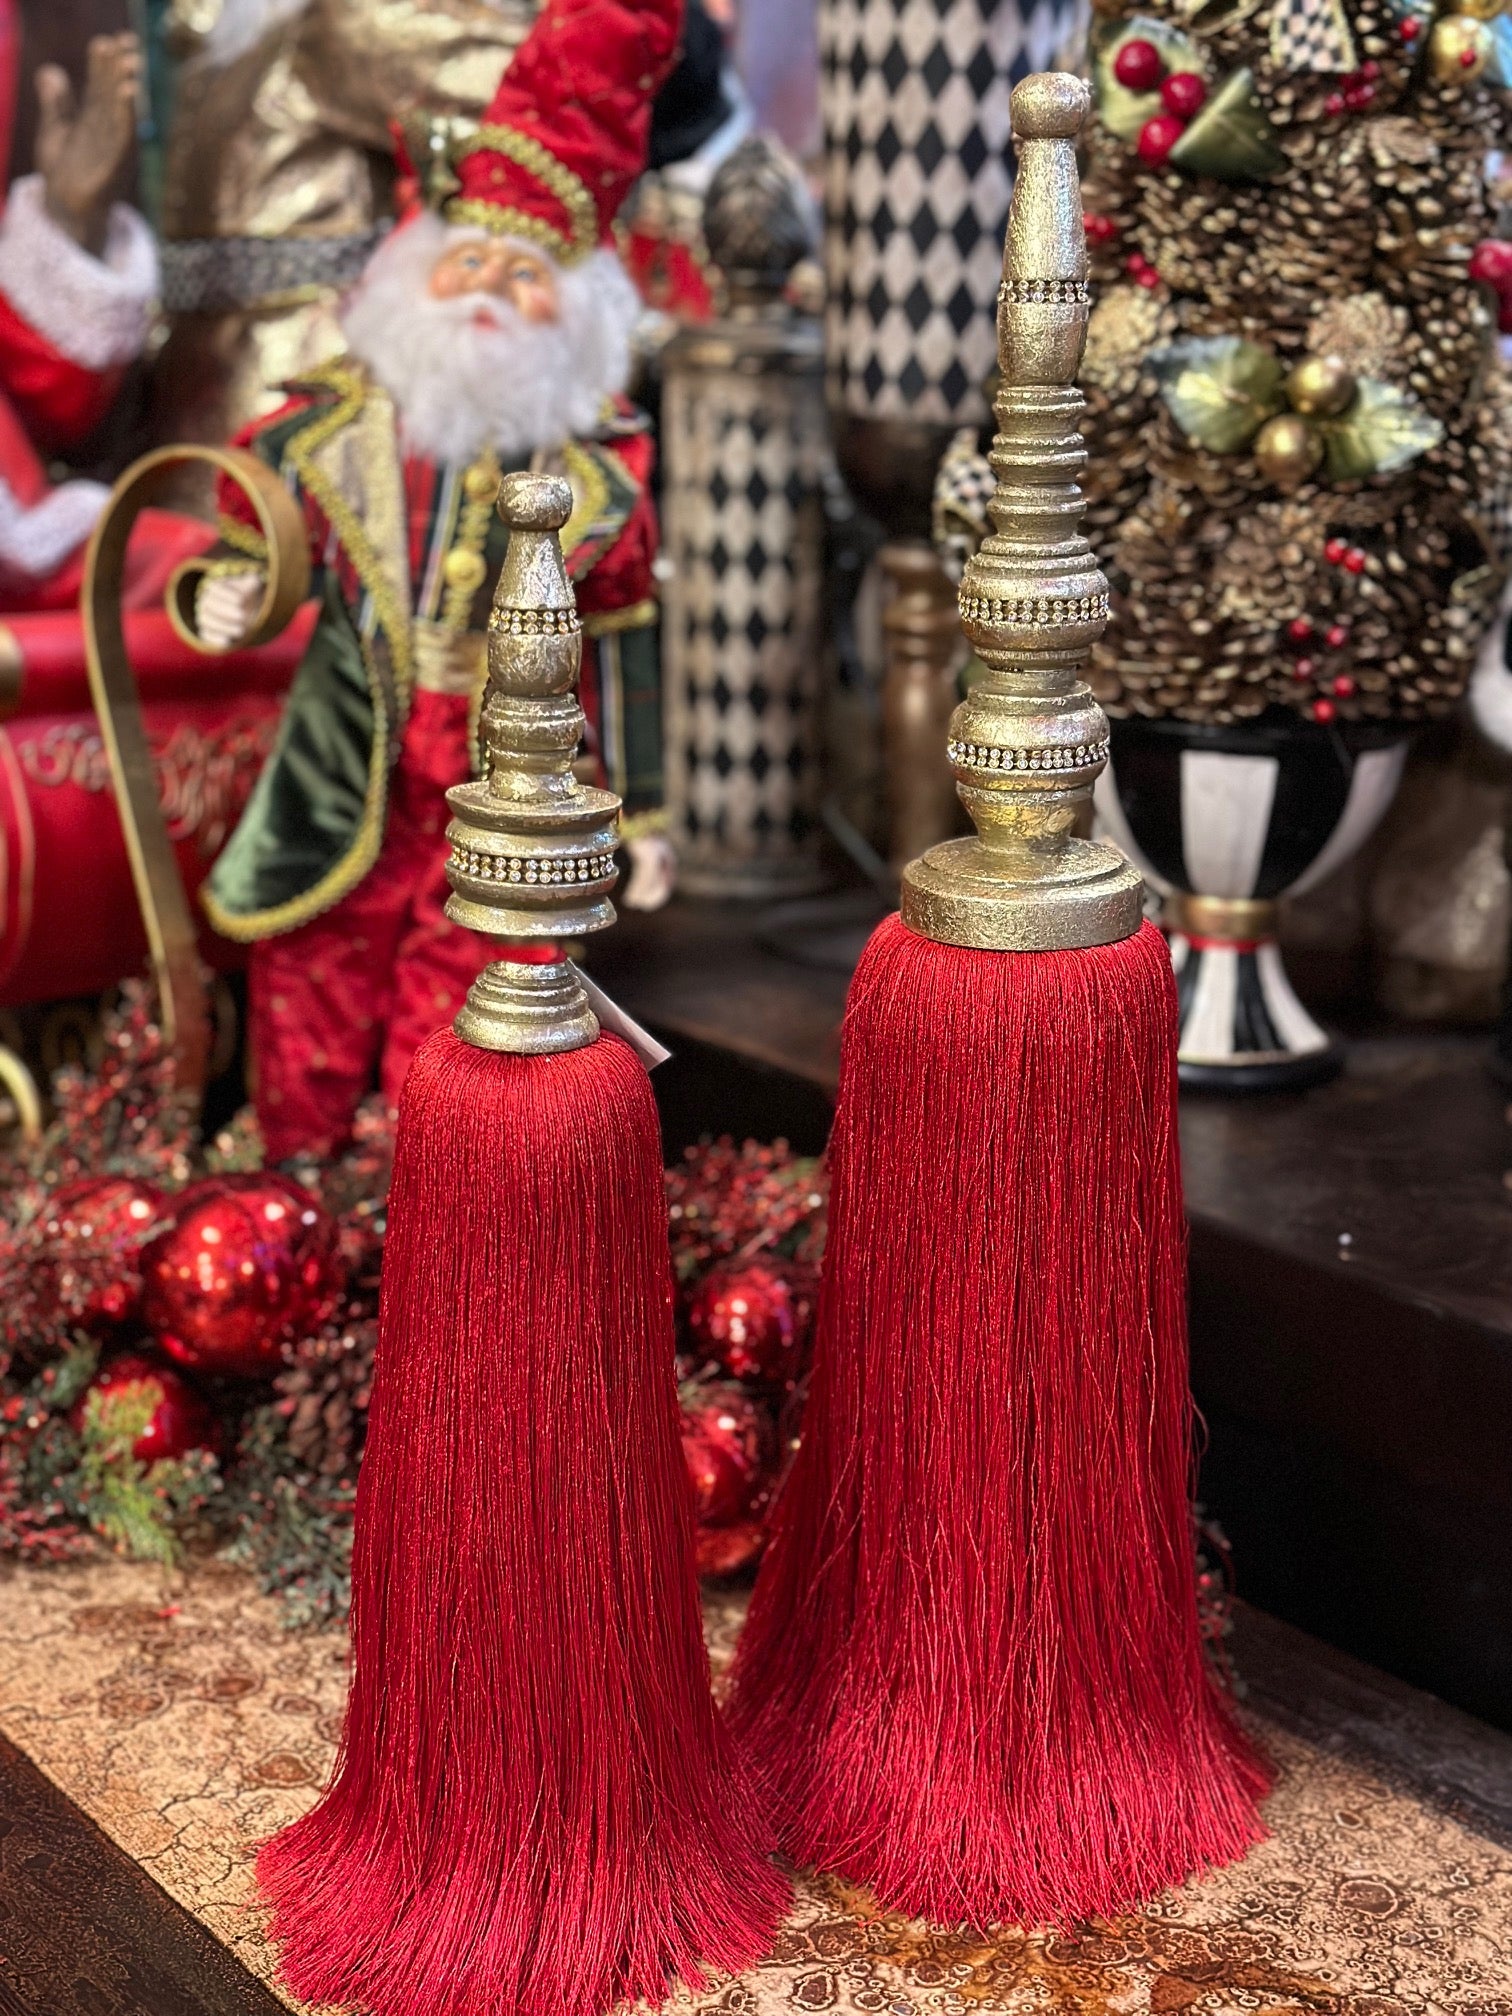 Set of 2 Standing Red Tassel Finials with Bling